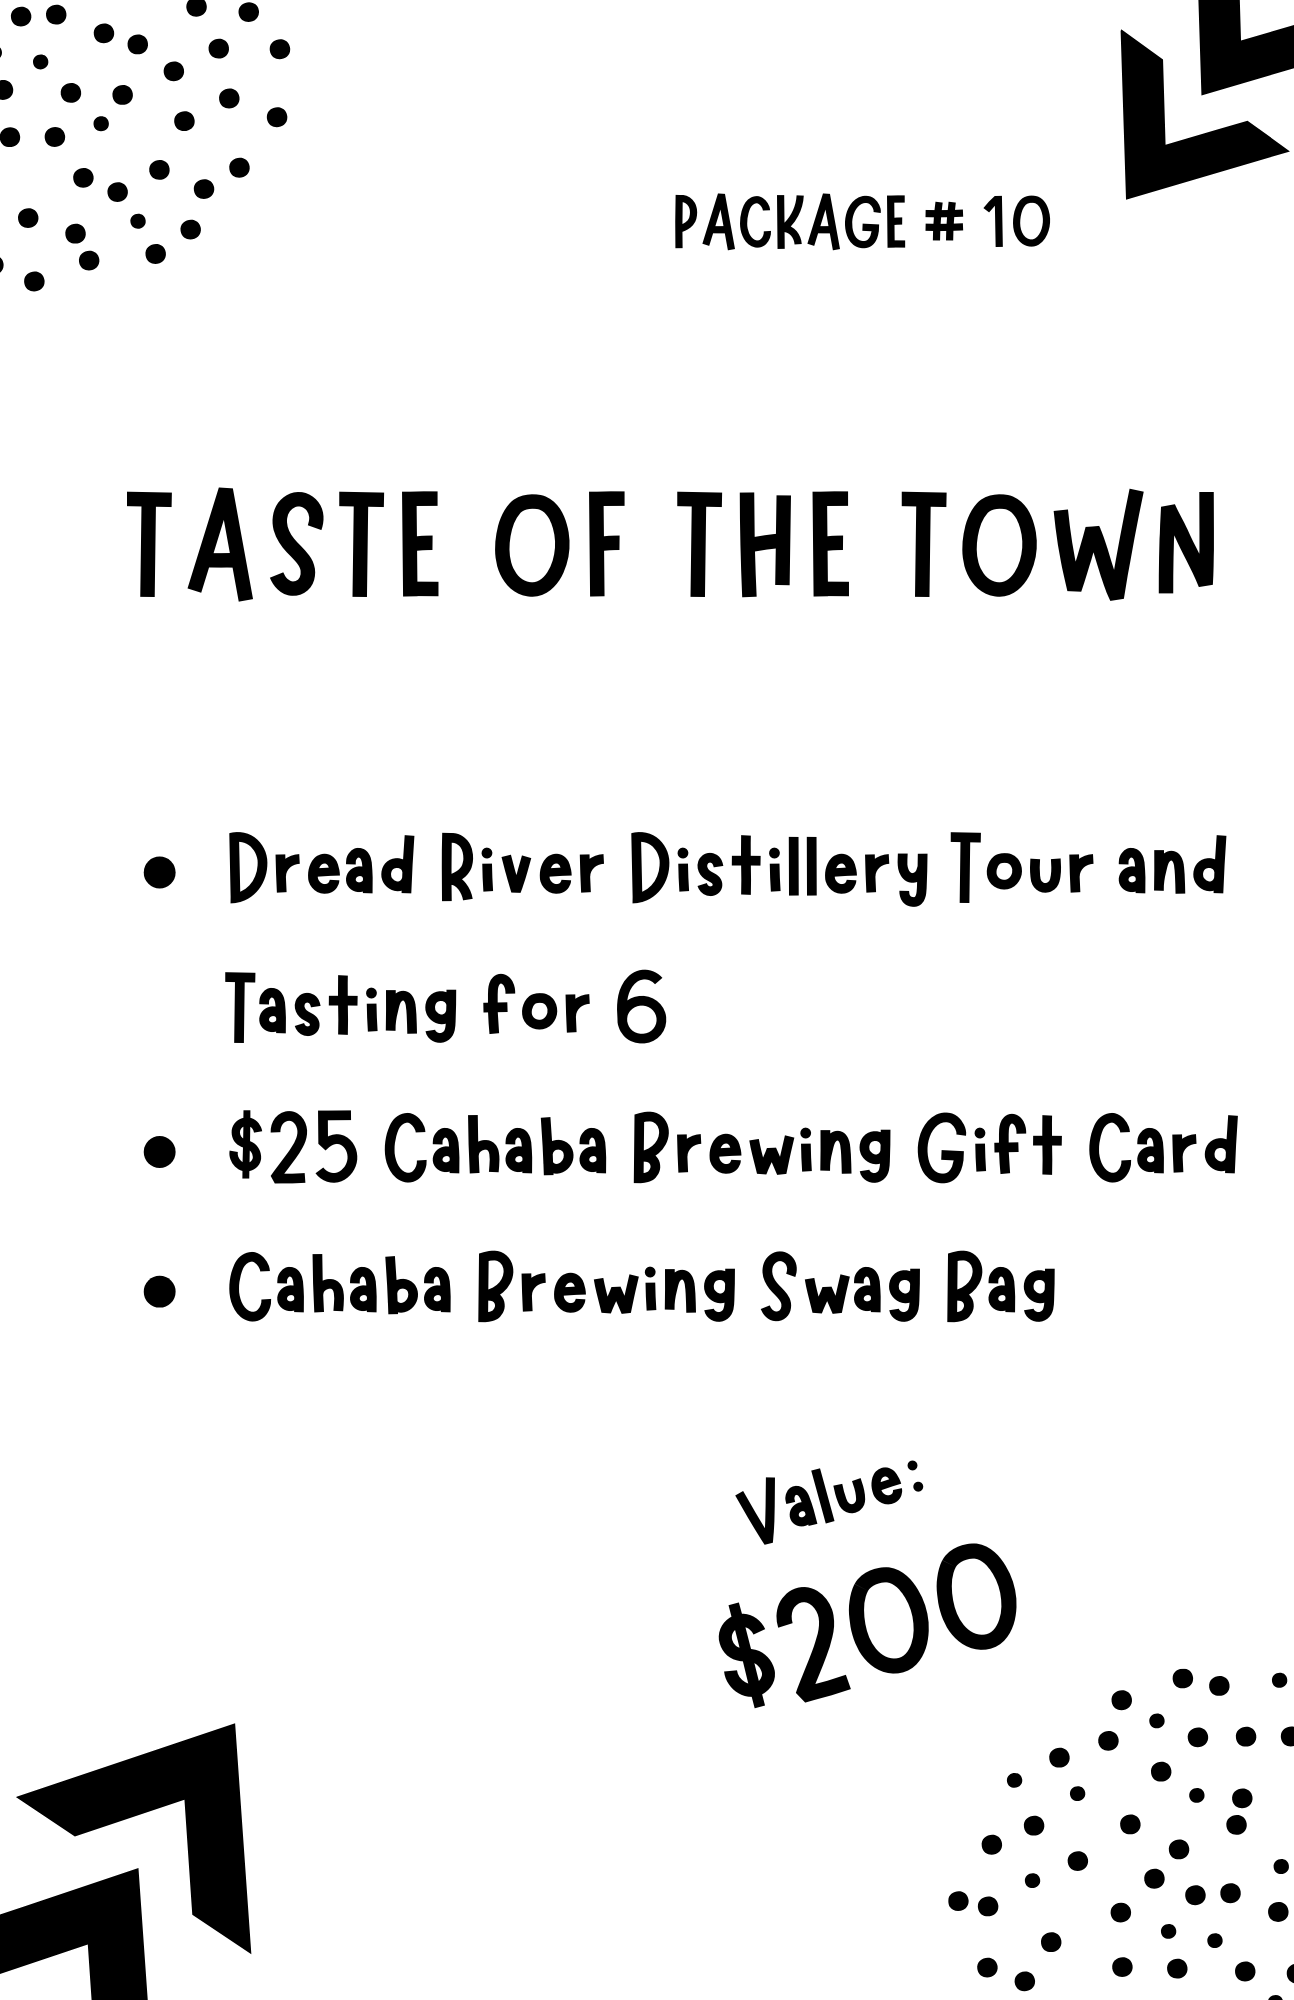 Auction Item #10: Taste of the Town